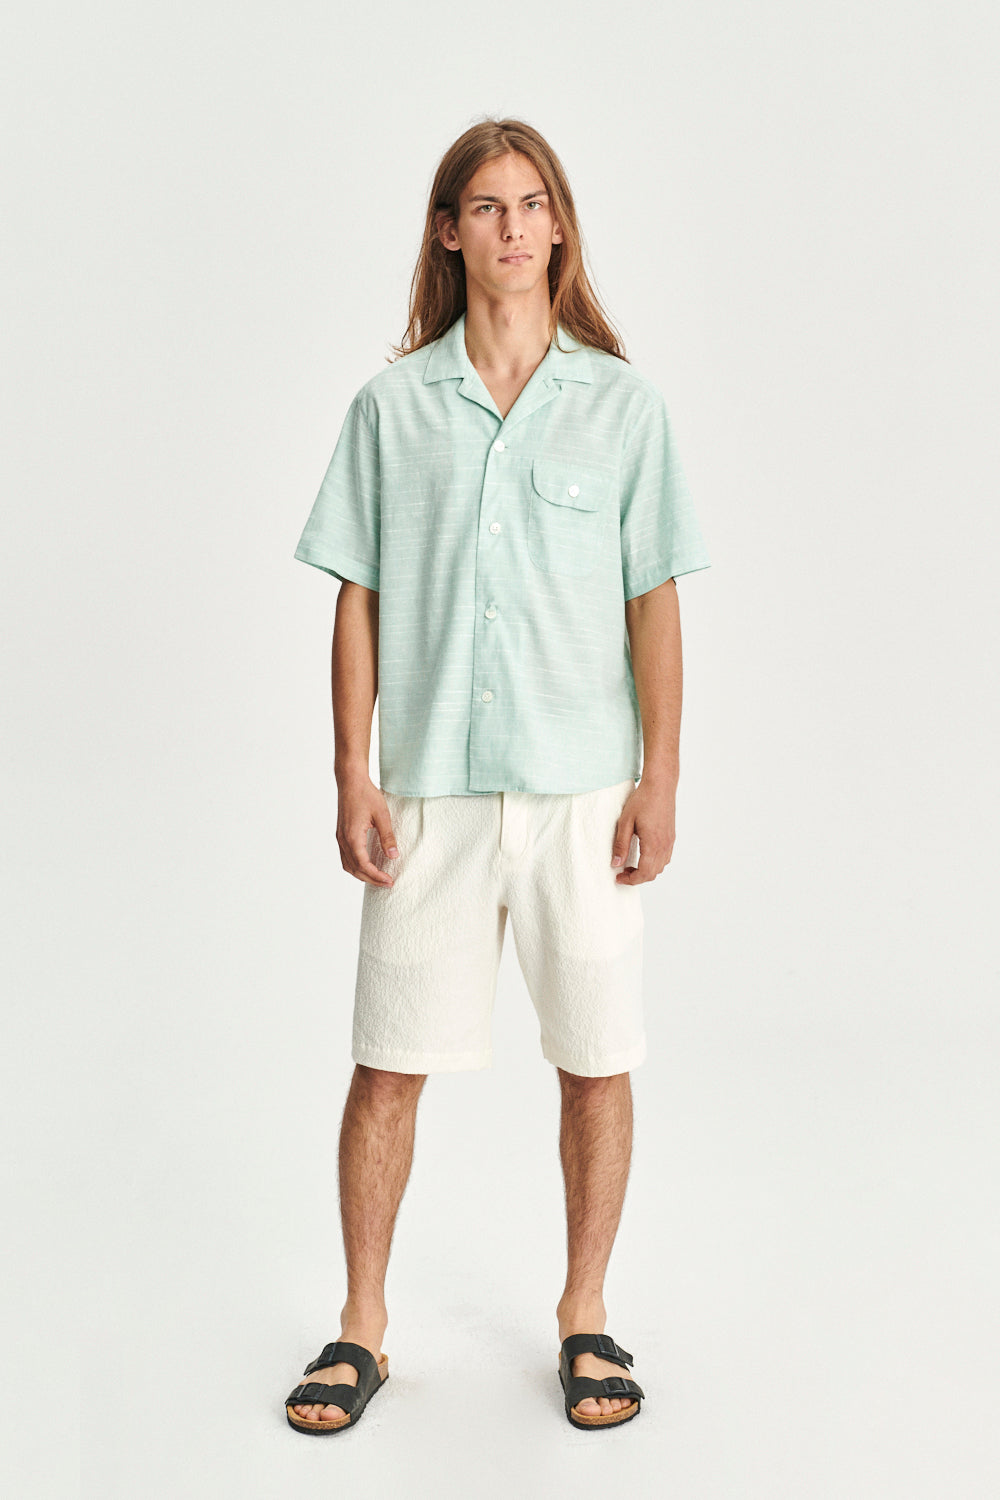 Camp Collar Shirt in a Subtle Mint Green Mix of Portuguese Cotton, Linen and Pineapple